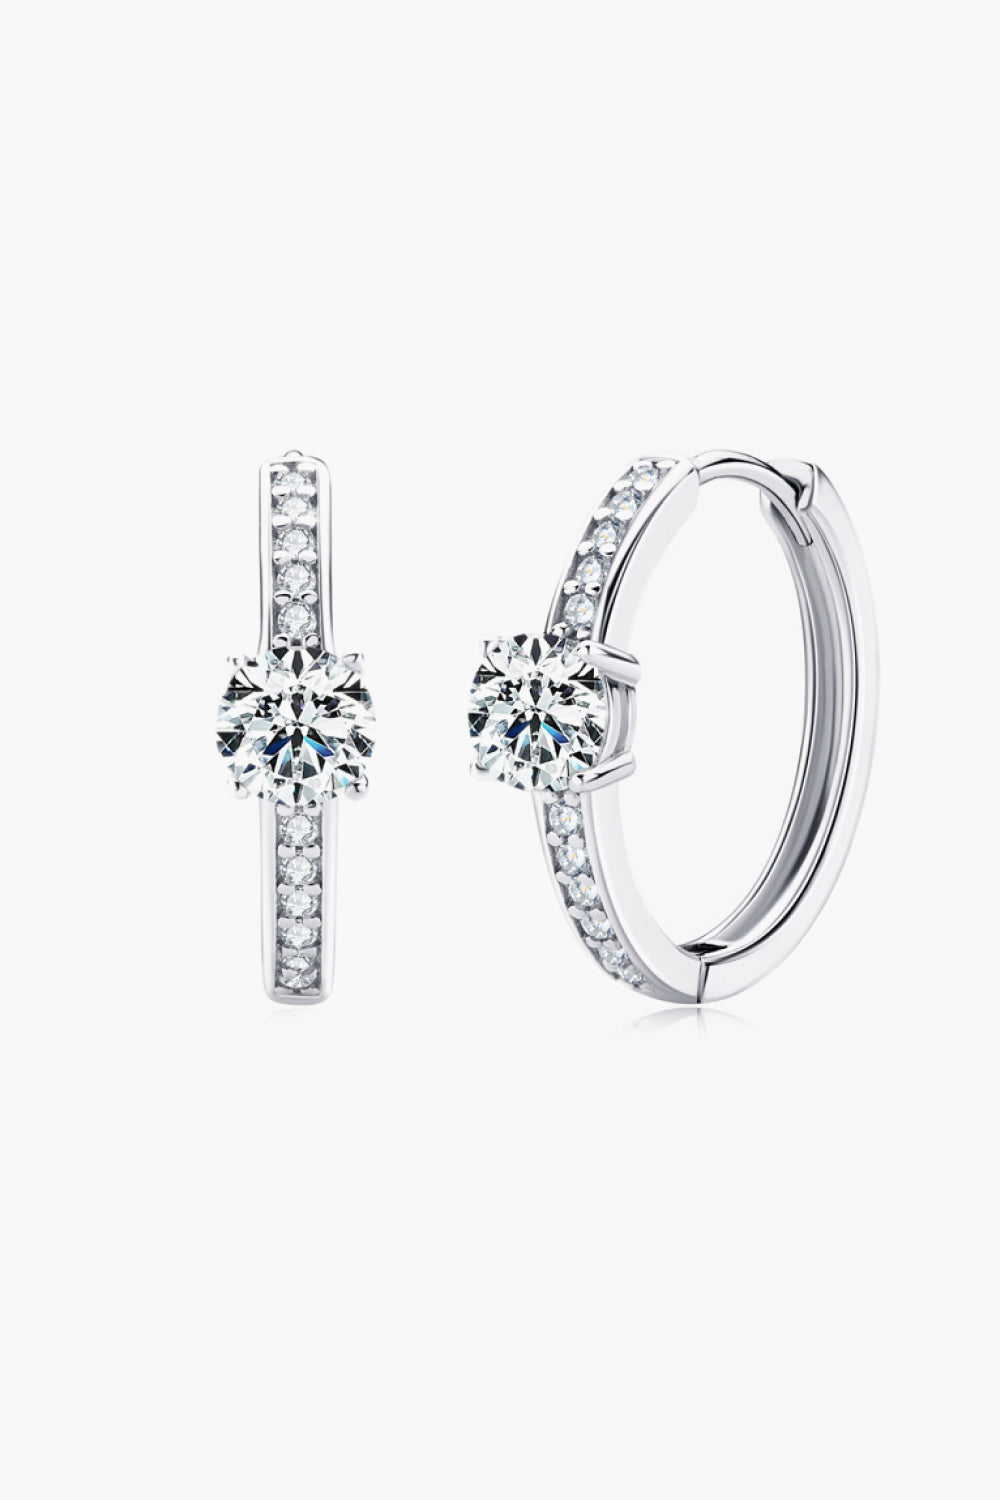 Carry Your Love 1 Carat Moissanite Platinum-Plated Earrings - Dash Trend